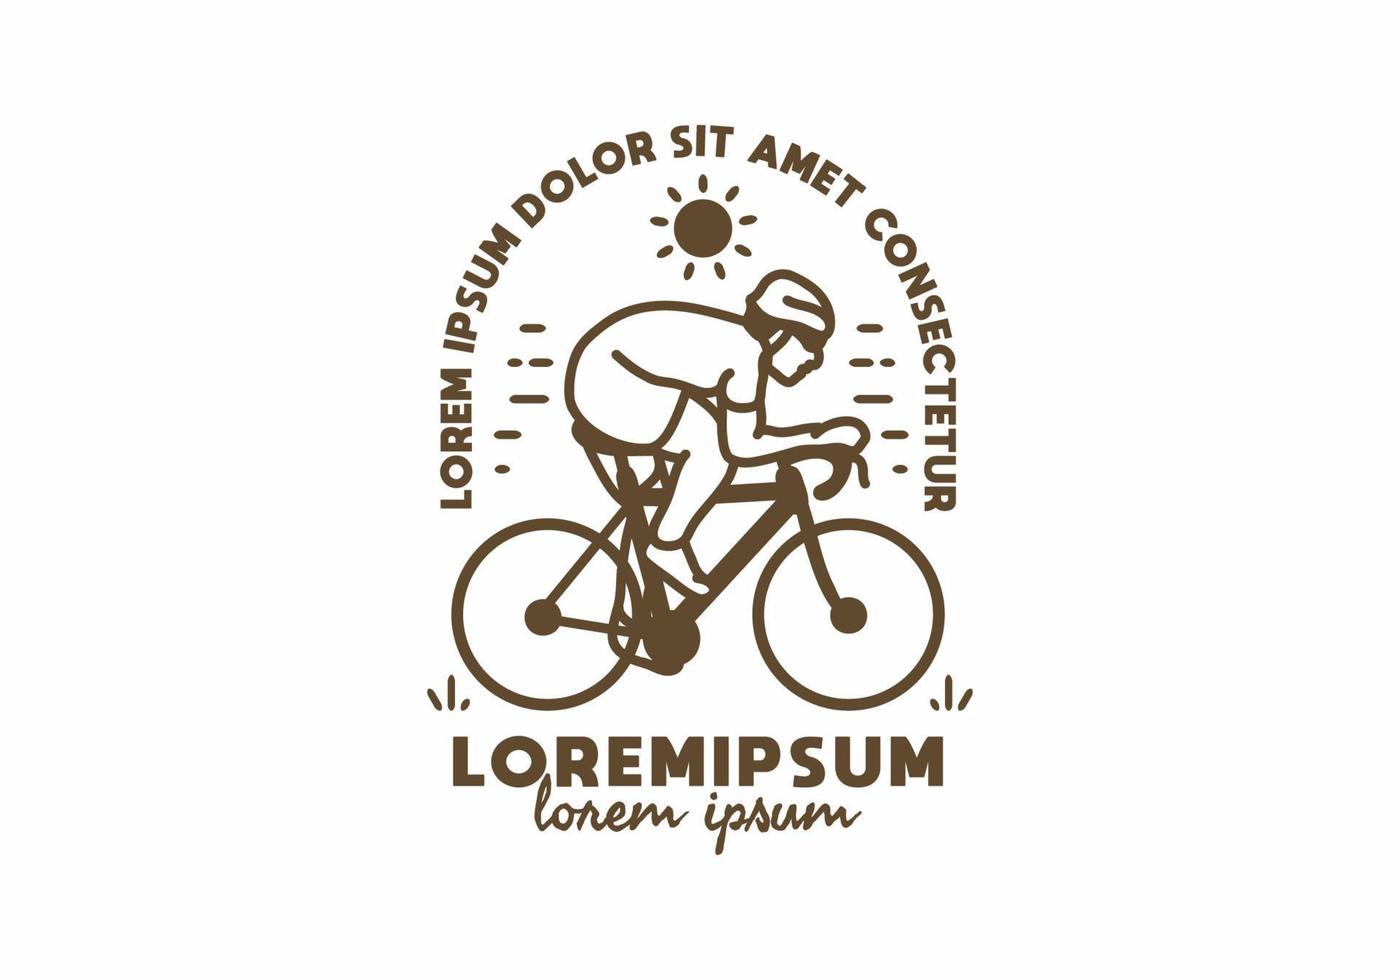 Fast bicycle line art with lorem ipsum text vector